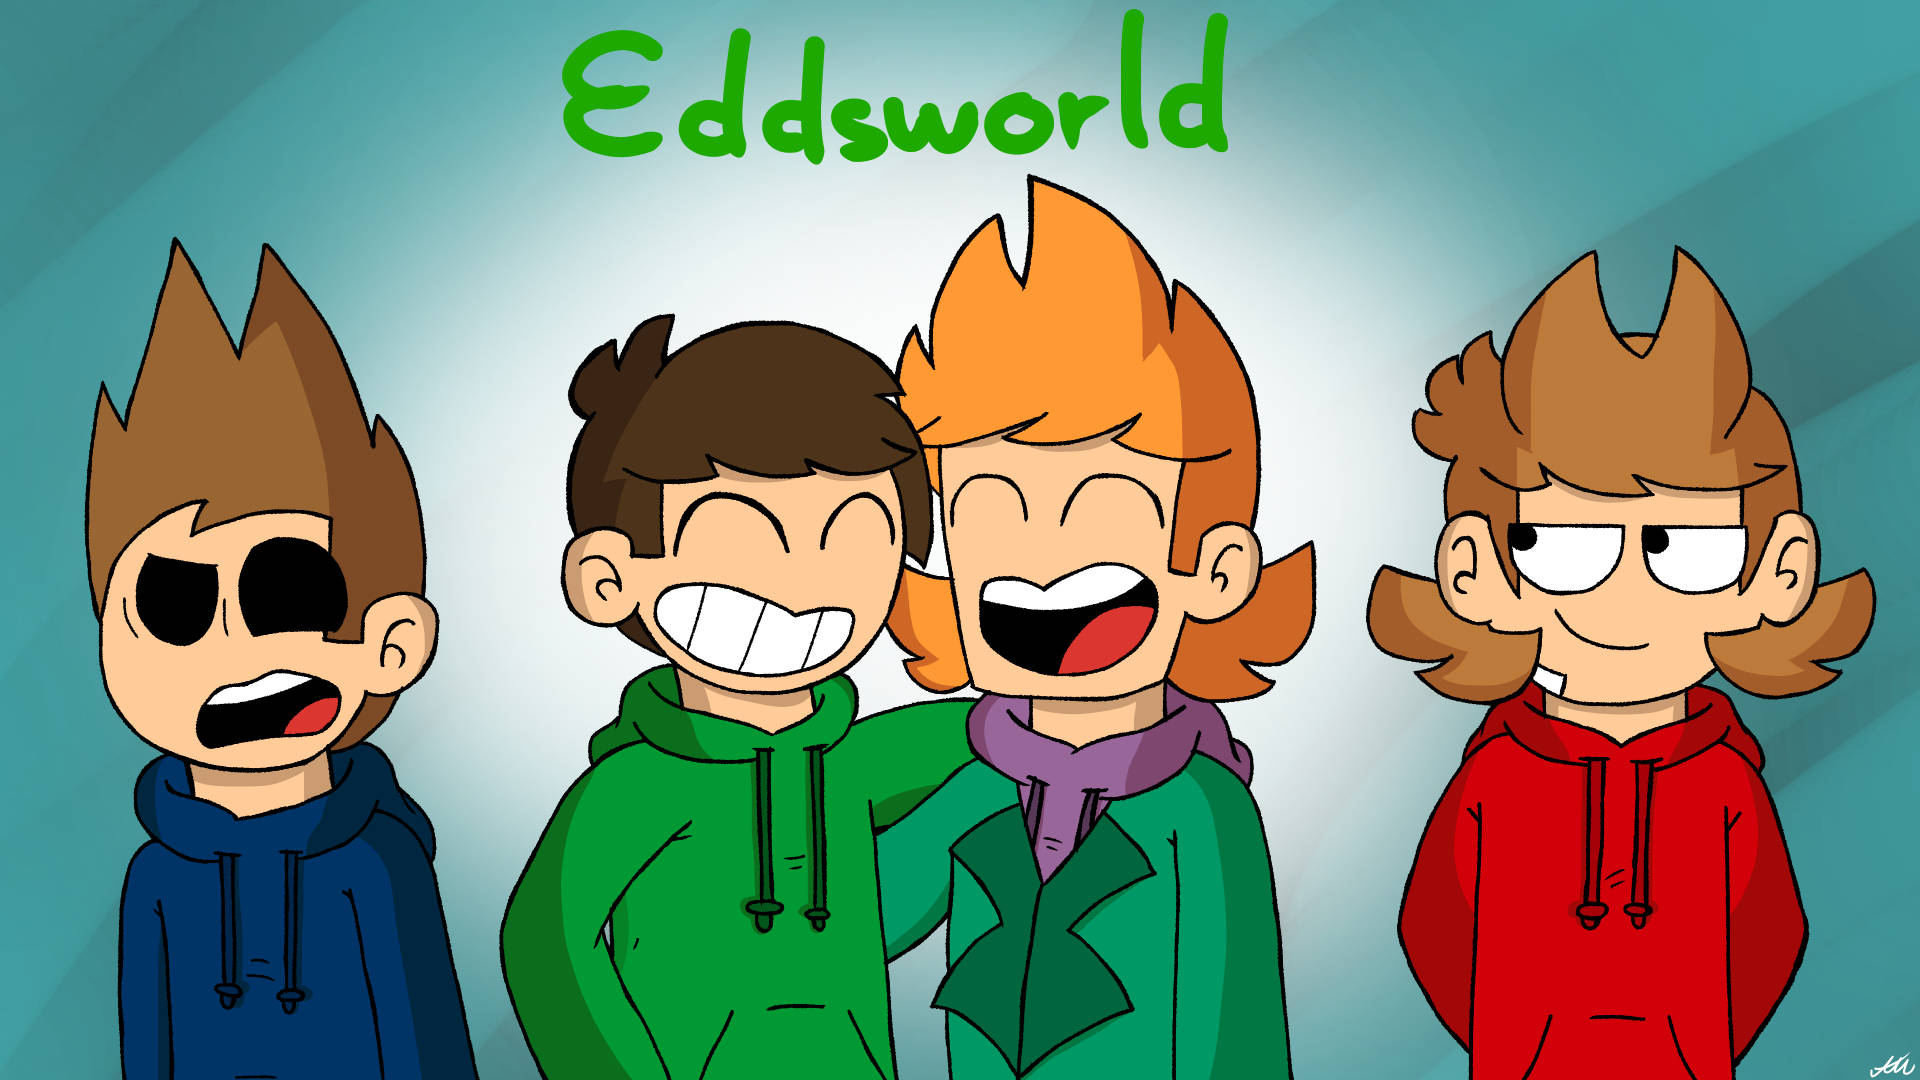 Top 999+ Eddsworld Wallpapers Full HD, 4K✅Free to Use